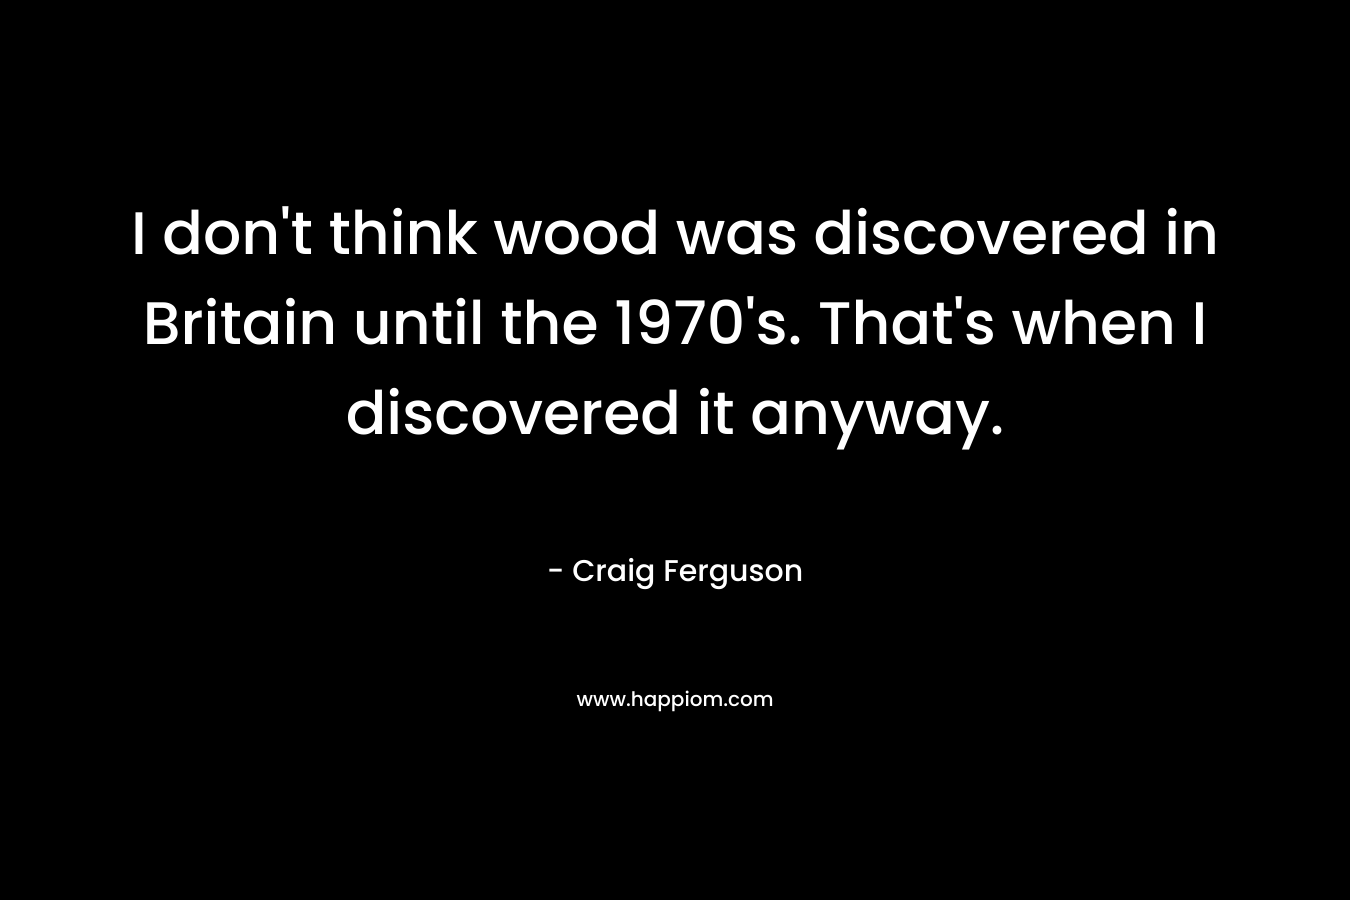 I don't think wood was discovered in Britain until the 1970's. That's when I discovered it anyway.